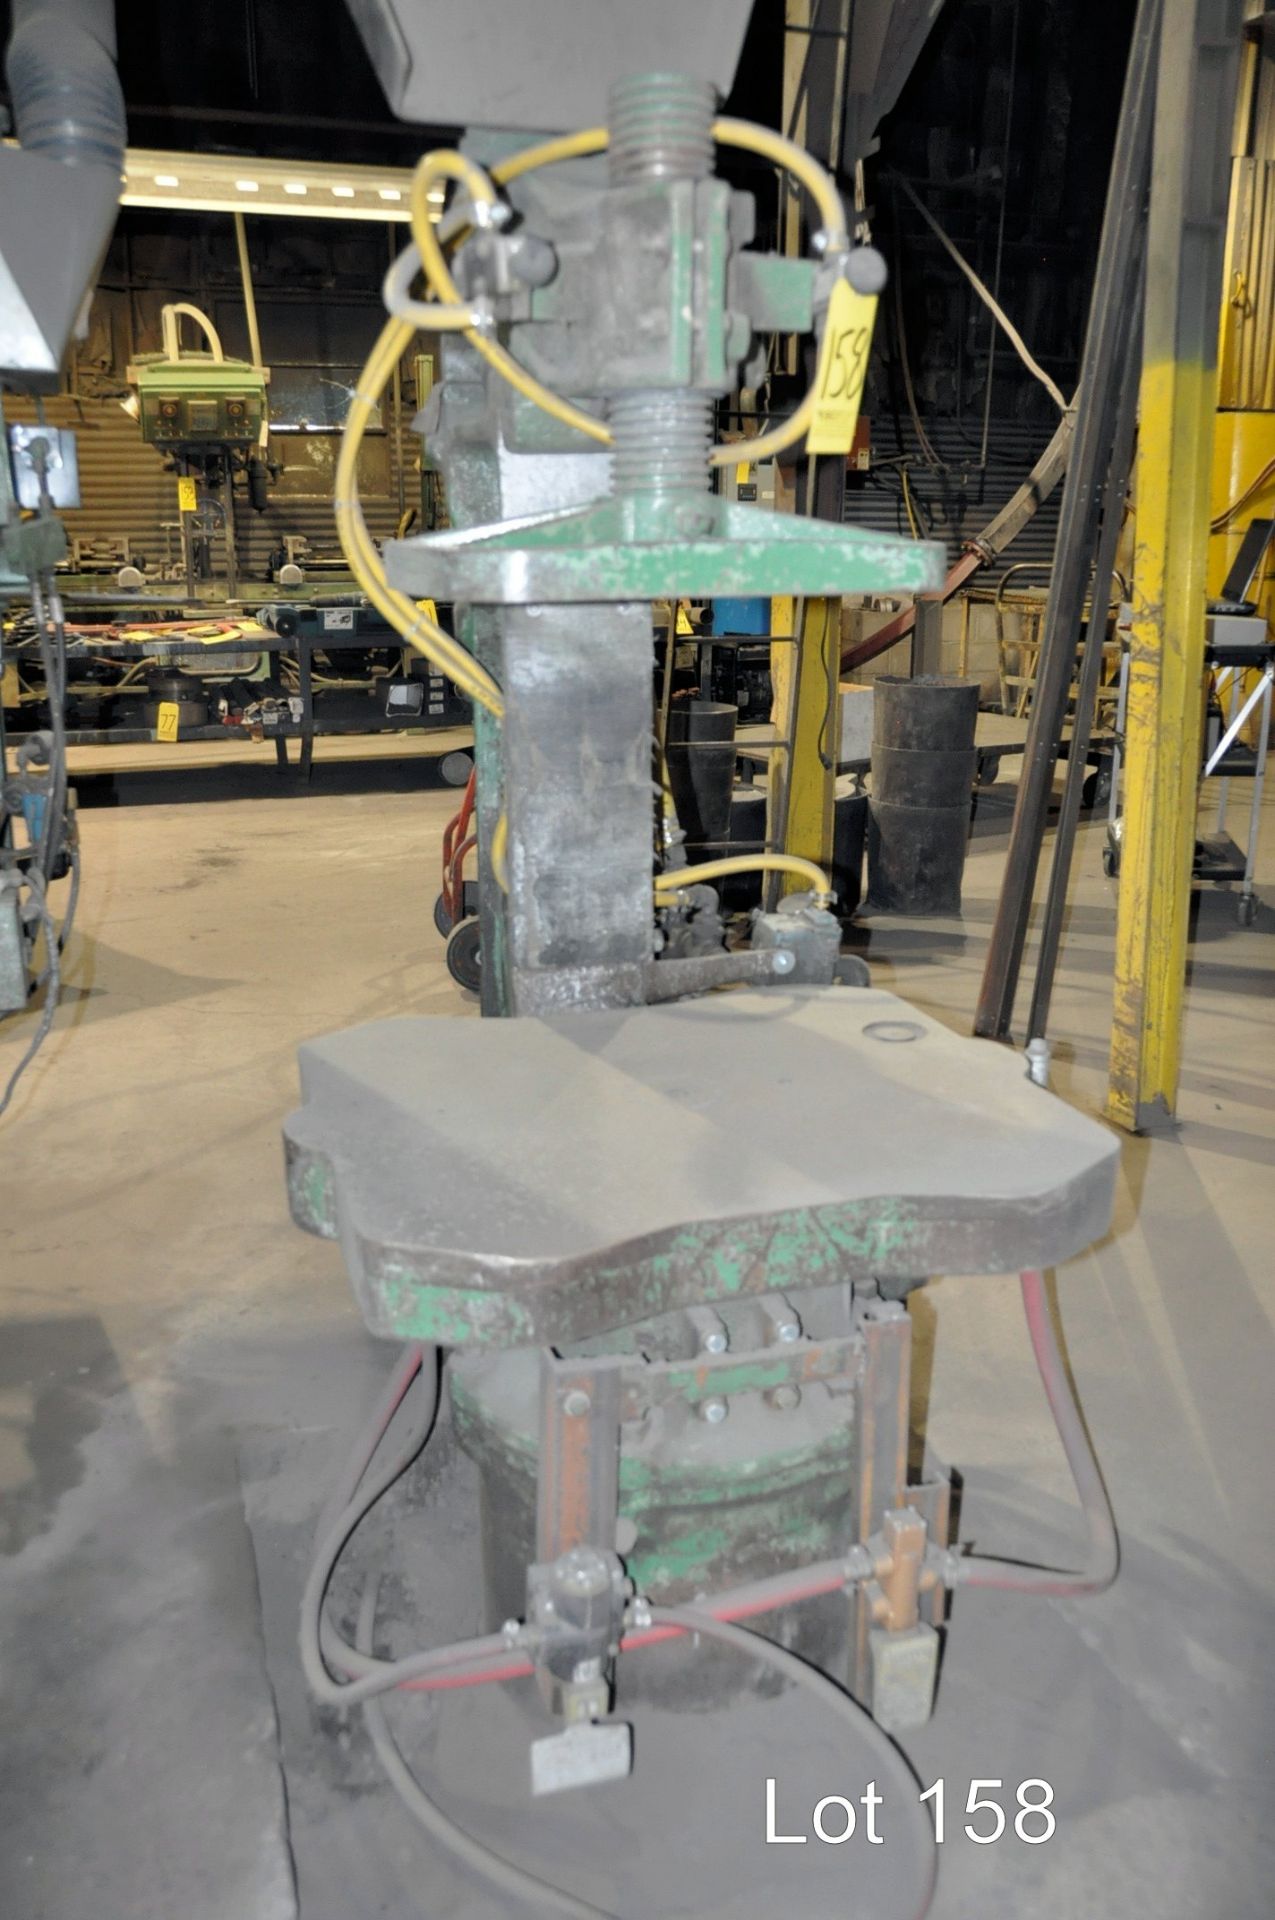 MILWAUKEE Jolt Squeeze Green Sand Molding Machine, S/N 18030, 24'' x 30'' Table Size